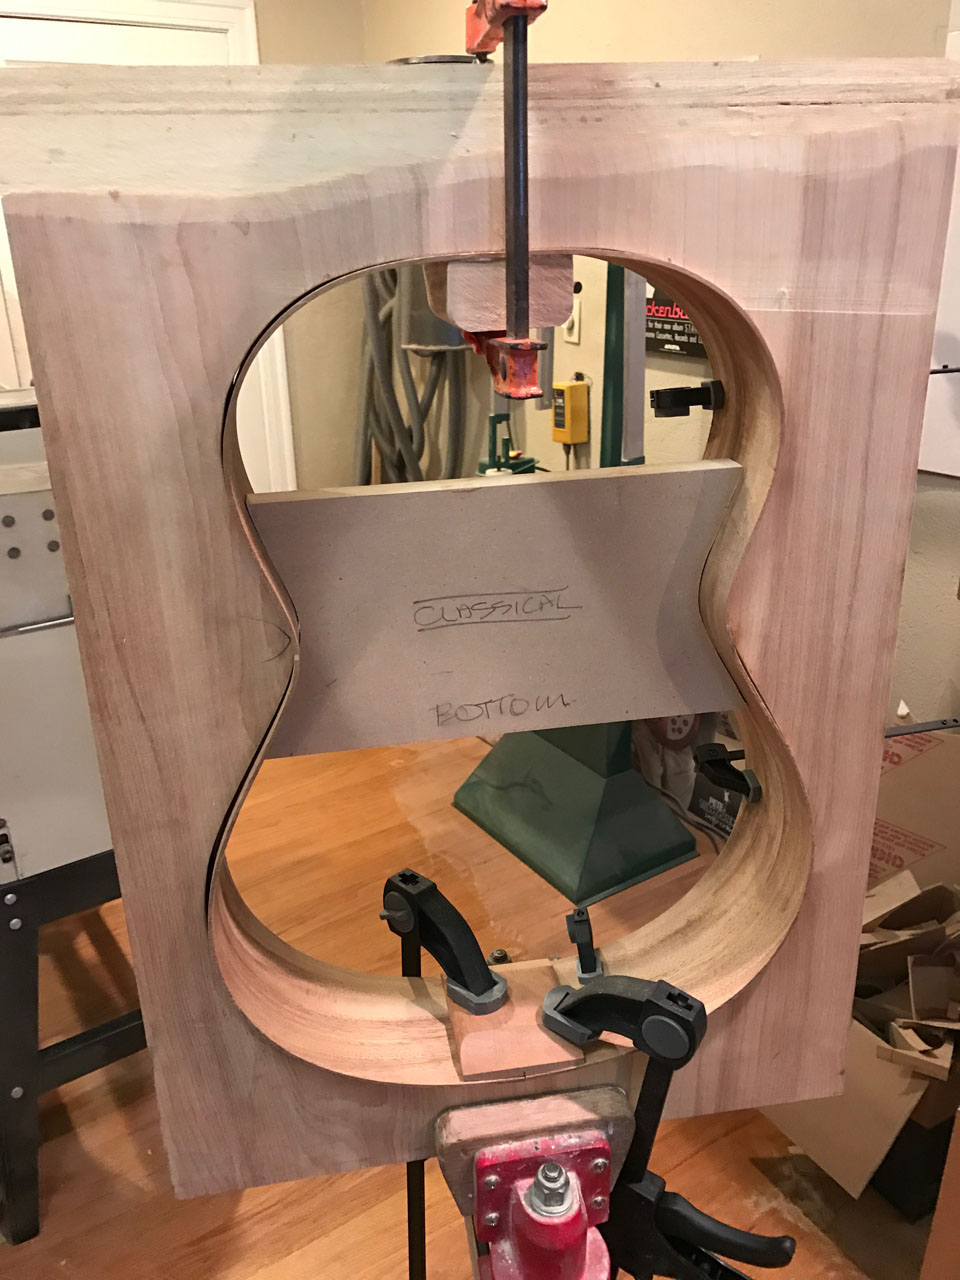 HERE, A CLASSICAL "HOOP", OR BODY SHELL, IS FITTED INTO ITS MOLD PRIOR TO GLUING IN THE LINING STRIPS. THE NECK HEEL AND TAIL BLOCKS HAVE BEEN GLUED AND ARE CLAMPED INTO PLACE UNTIL THE GLUE DRIES.